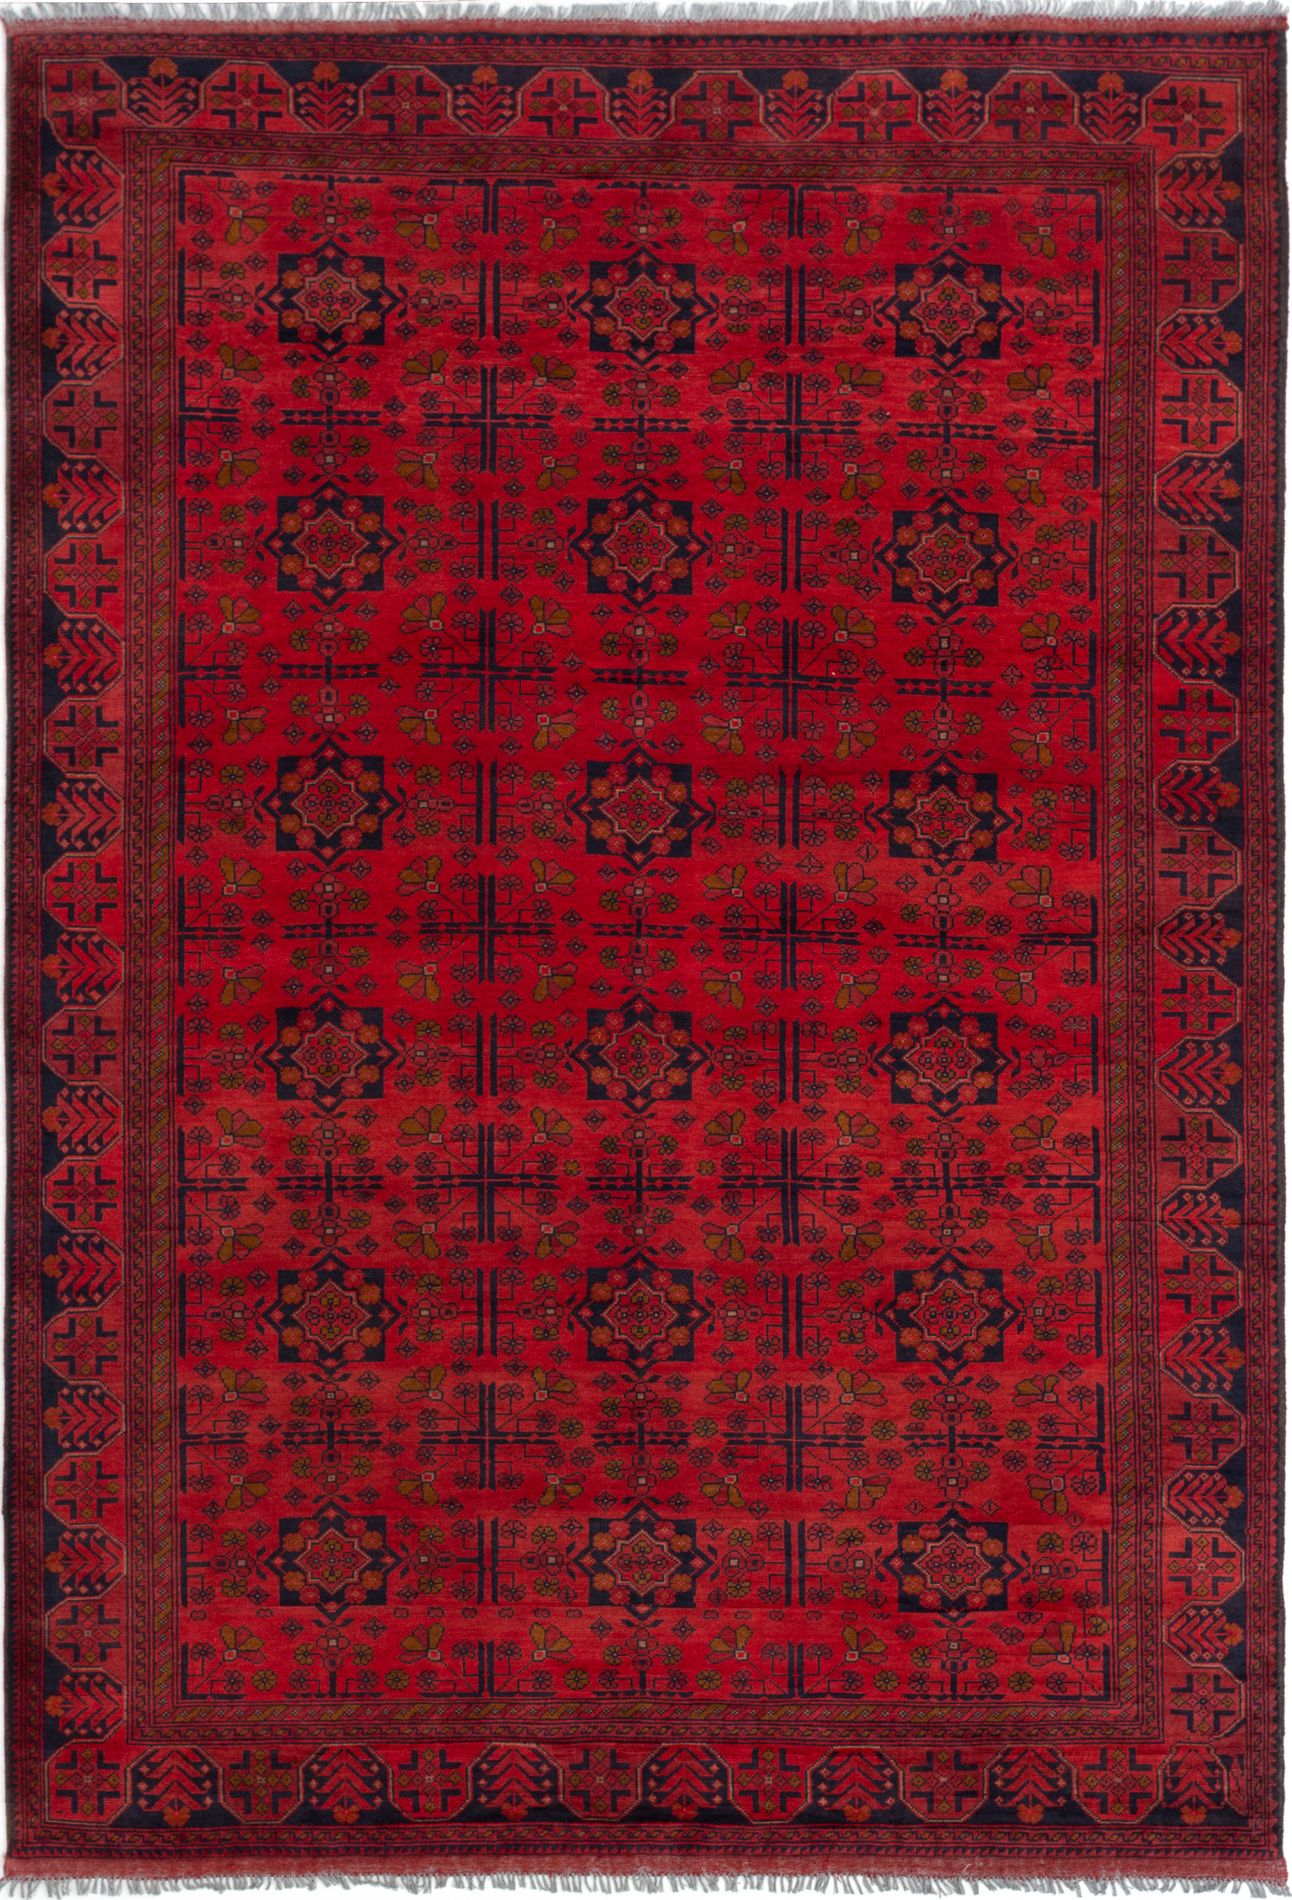 Hand-knotted Finest Khal Mohammadi Red Wool Rug 6'8" x 9'8"  Size: 6'8" x 9'8"  